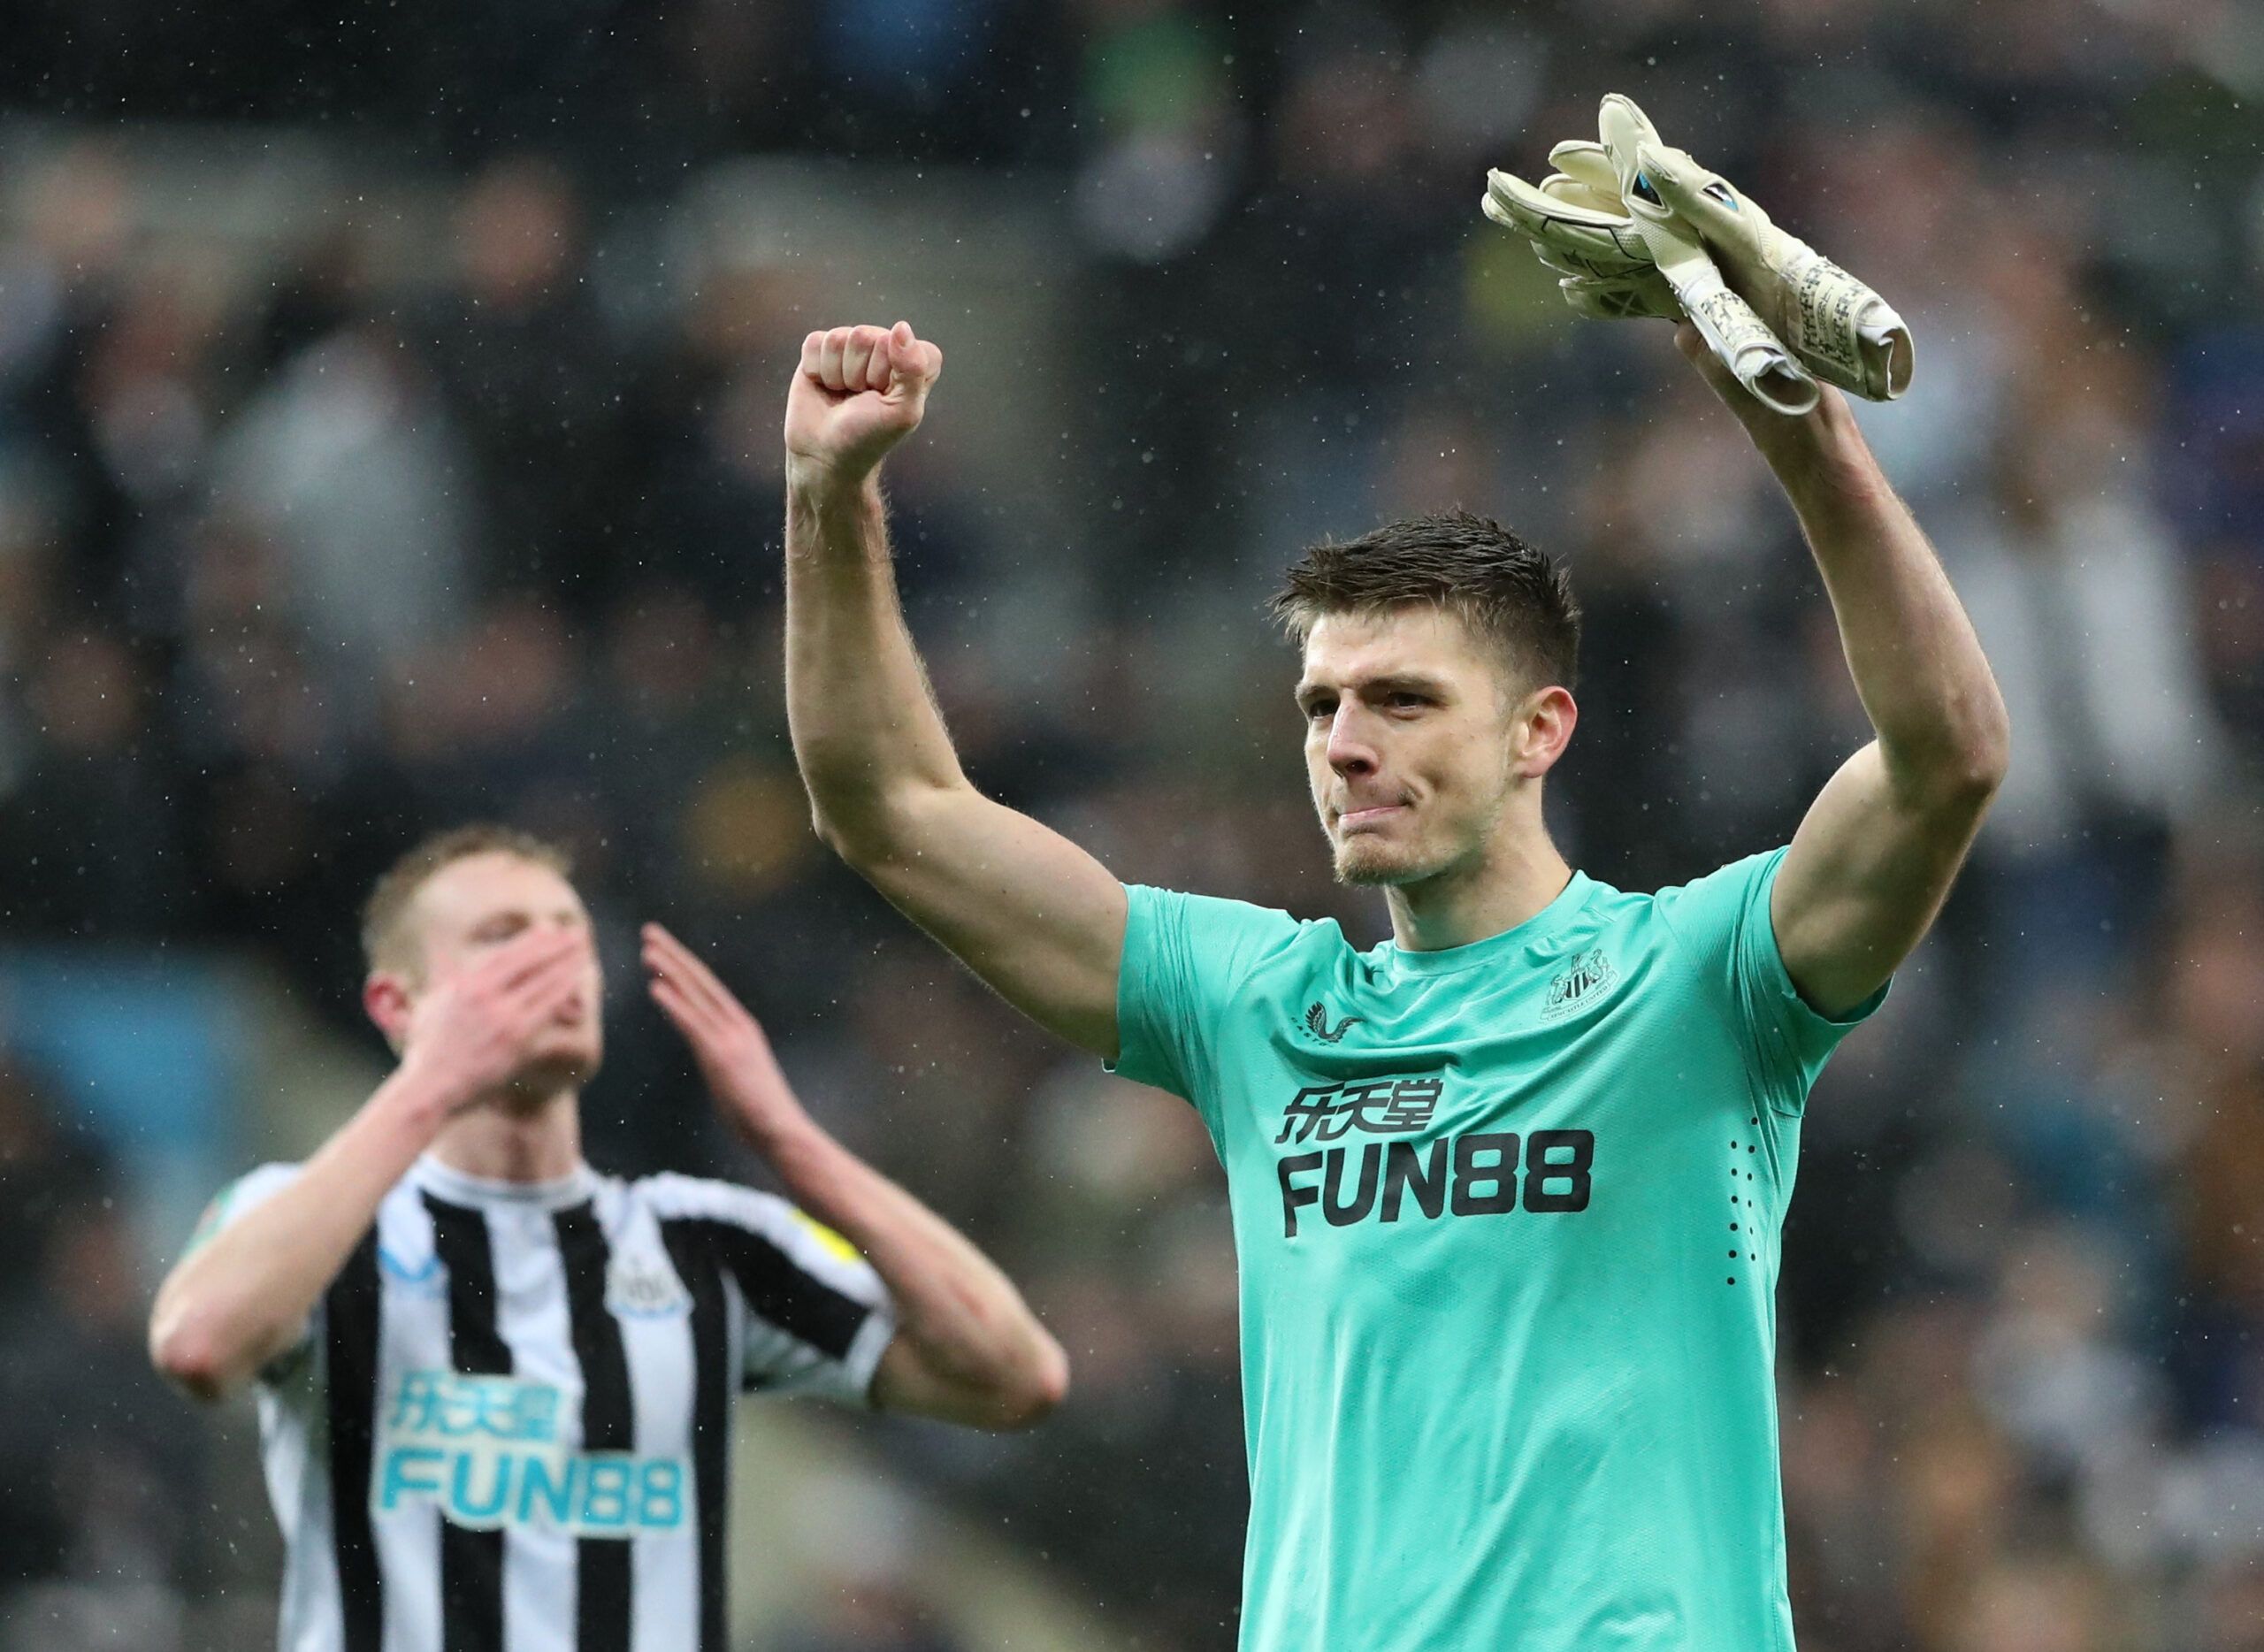 Soccer Football - Carabao Cup - Semi Final - Second Leg - Newcastle United v Southampton - St James' Park, Newcastle, Britain - January 31, 2023 Newcastle United's Nick Pope celebrates after the match REUTERS/Scott Heppell EDITORIAL USE ONLY. No use with unauthorized audio, video, data, fixture lists, club/league logos or 'live' services. Online in-match use limited to 75 images, no video emulation. No use in betting, games or single club /league/player publications.  Please contact your account